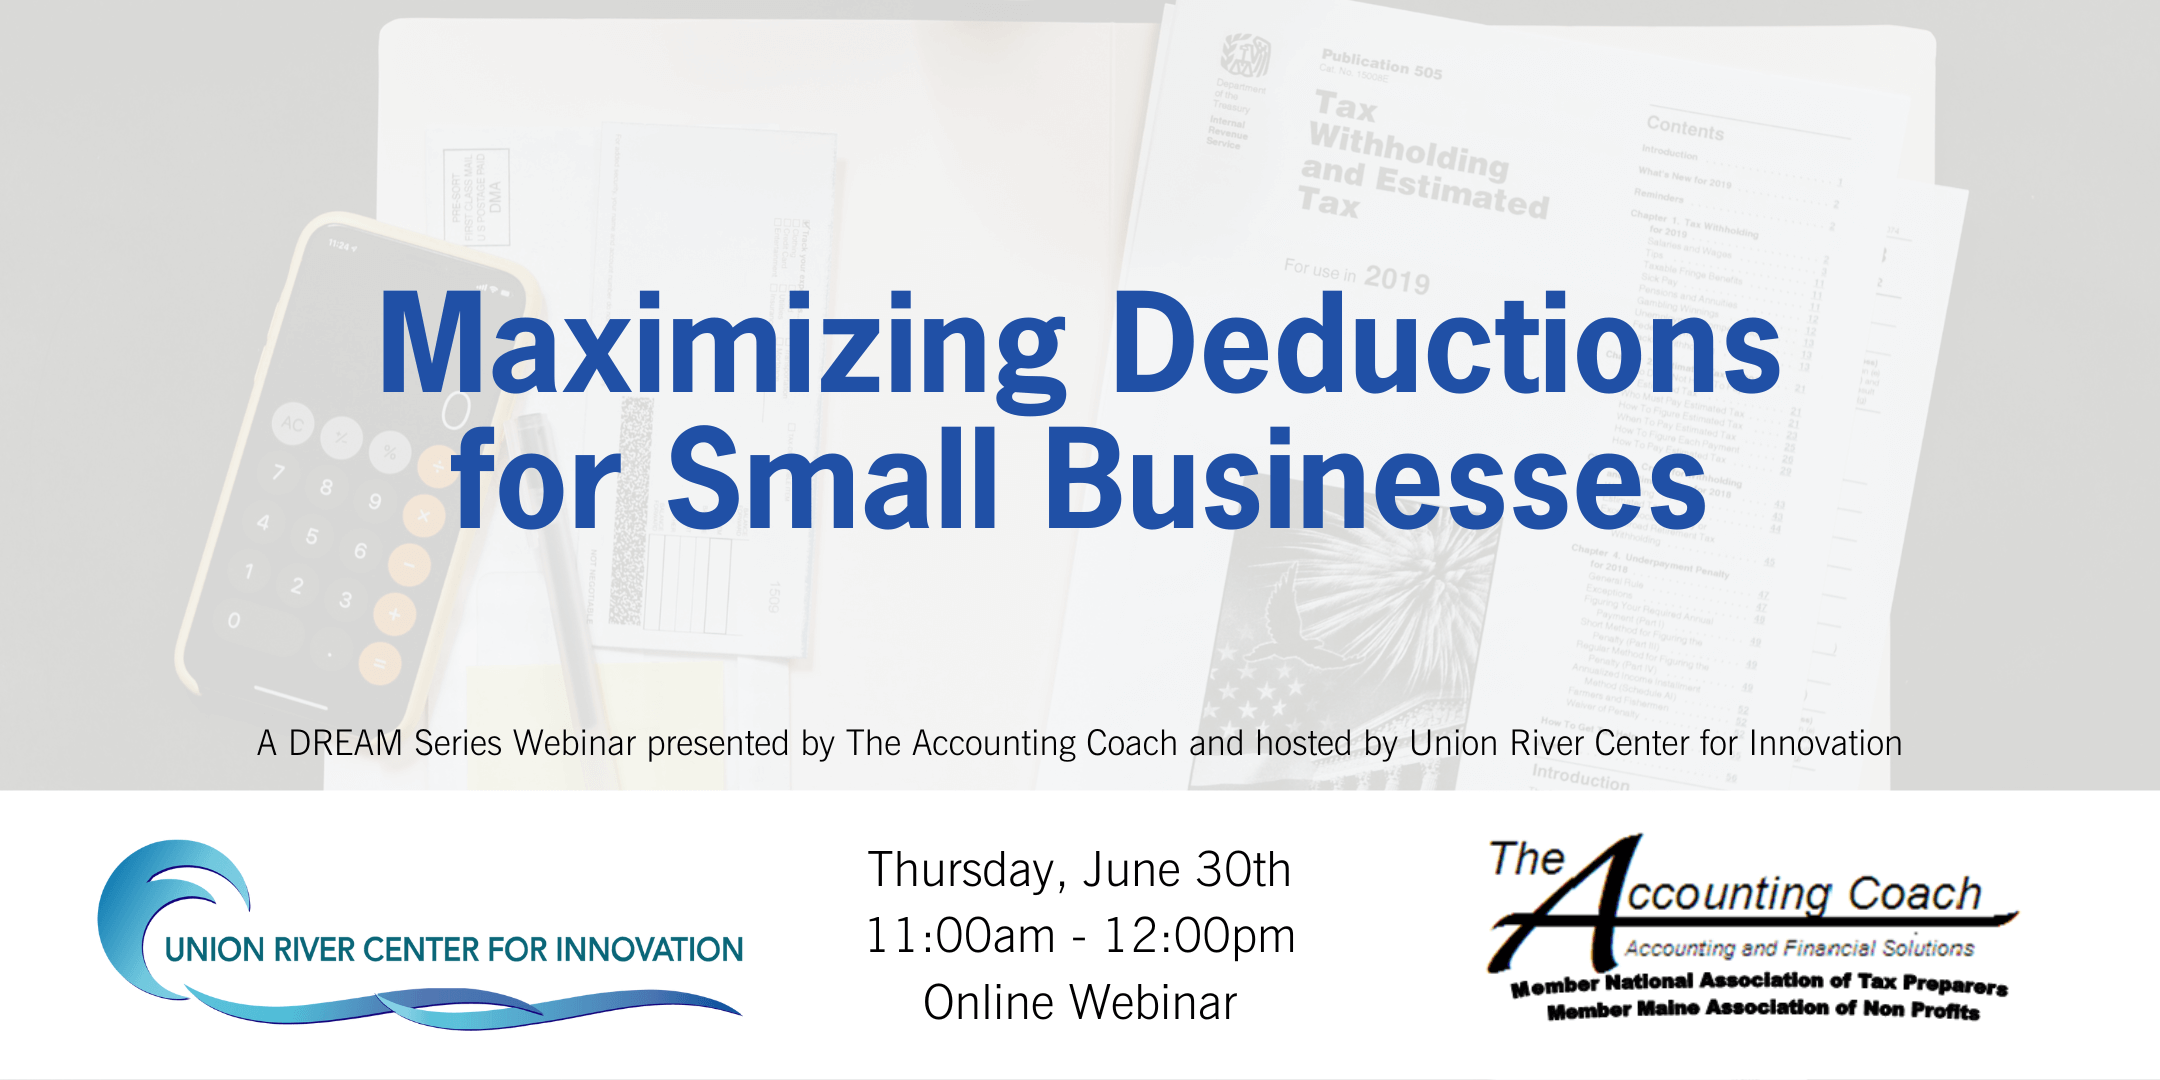 Maximizing Deductions for Small Businesses | Union River Center for Innovation